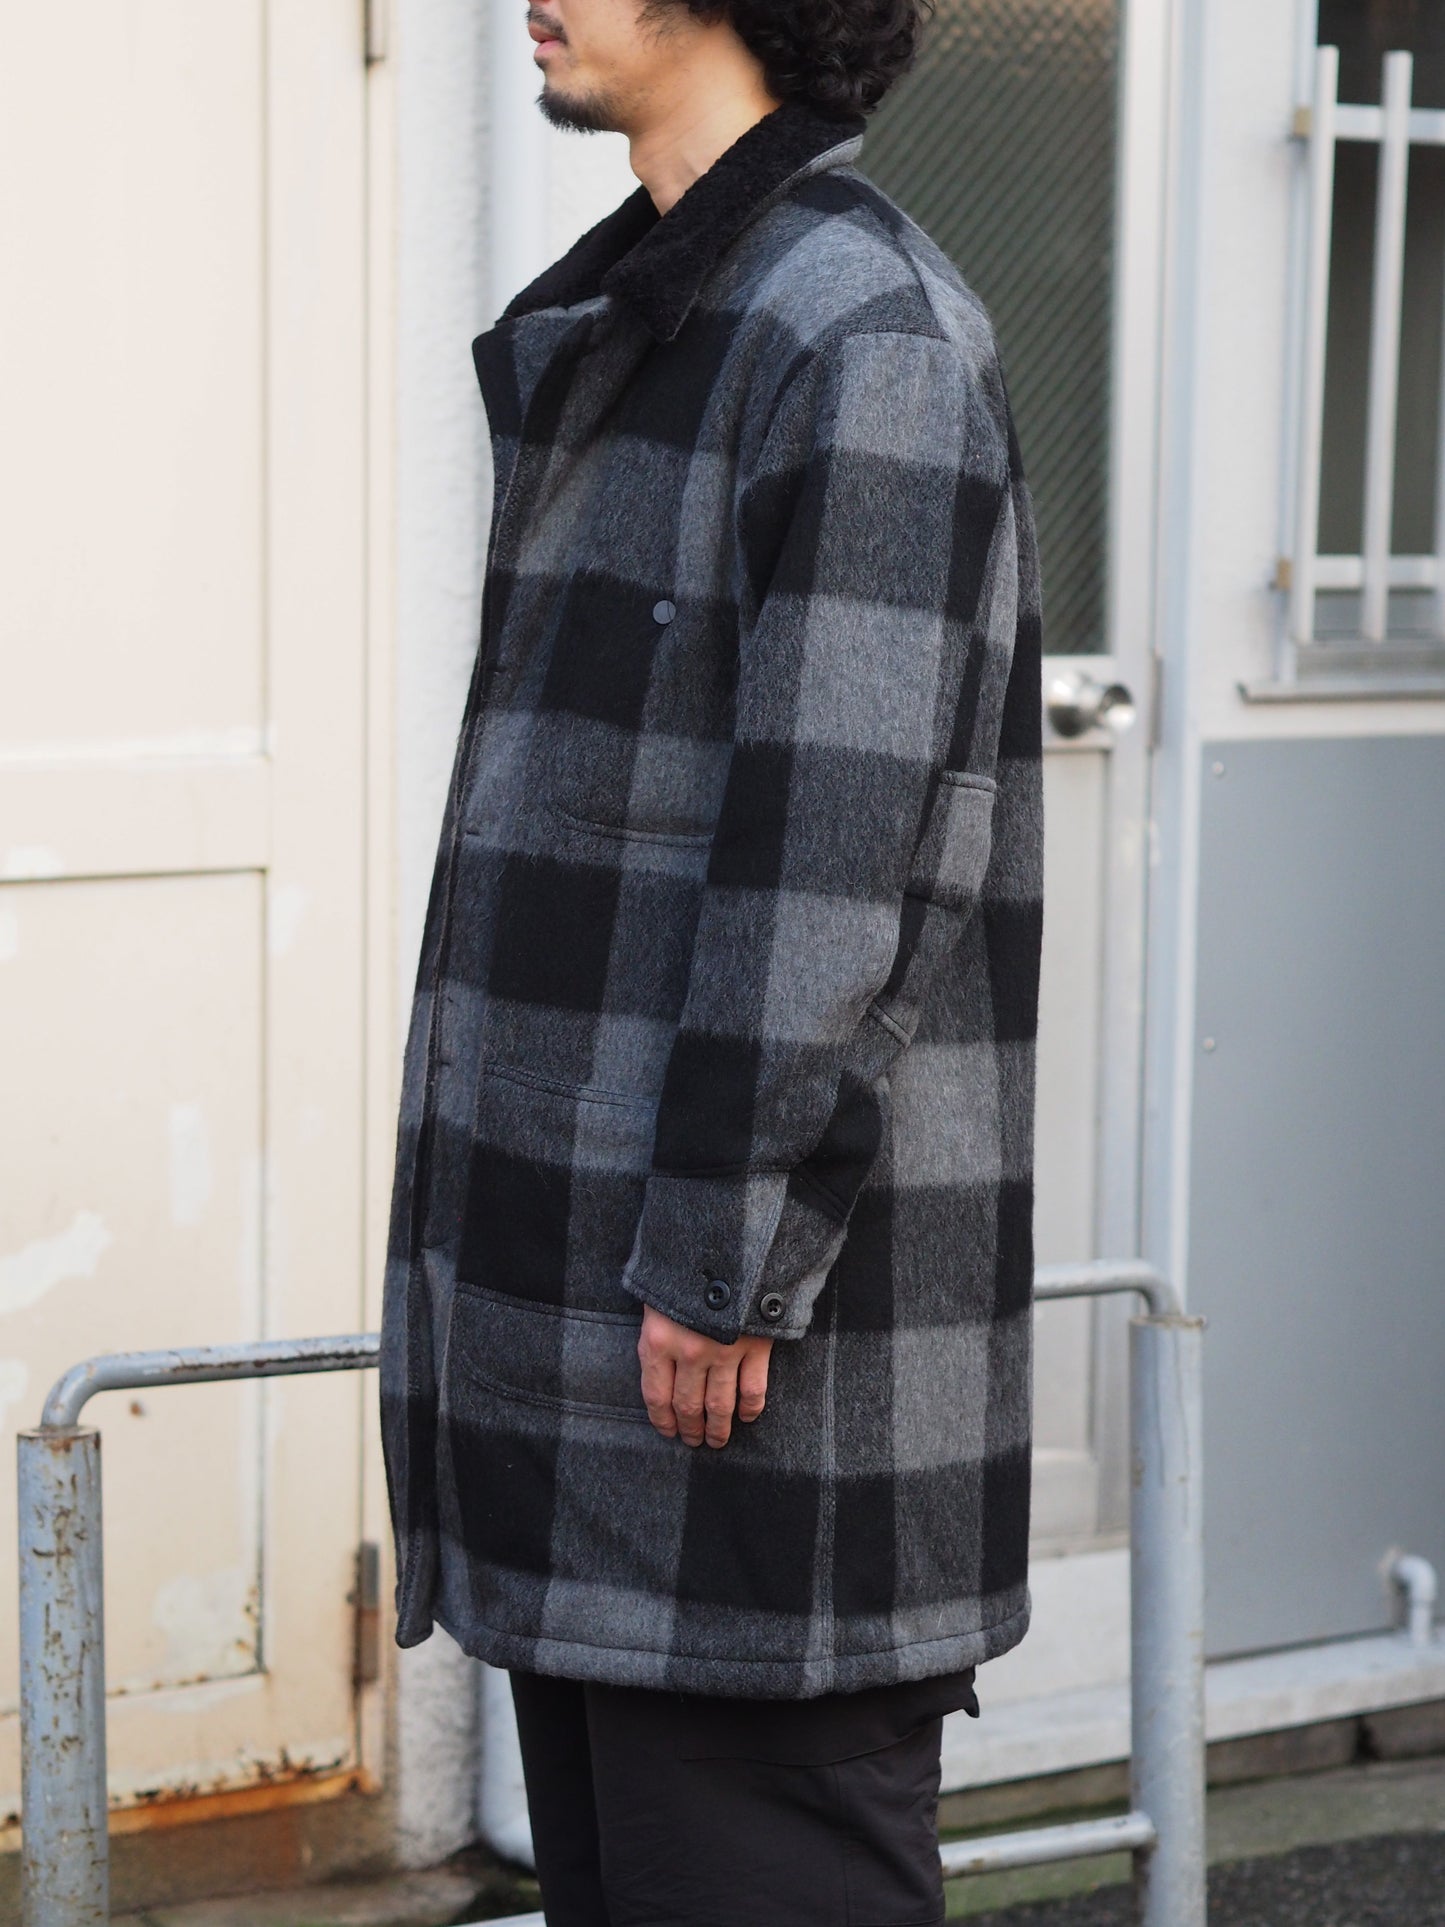 Rancher Long Coat W/P/N/A Wool Dobby Buffalo Check with GORE-TEX WINDSTOPPER